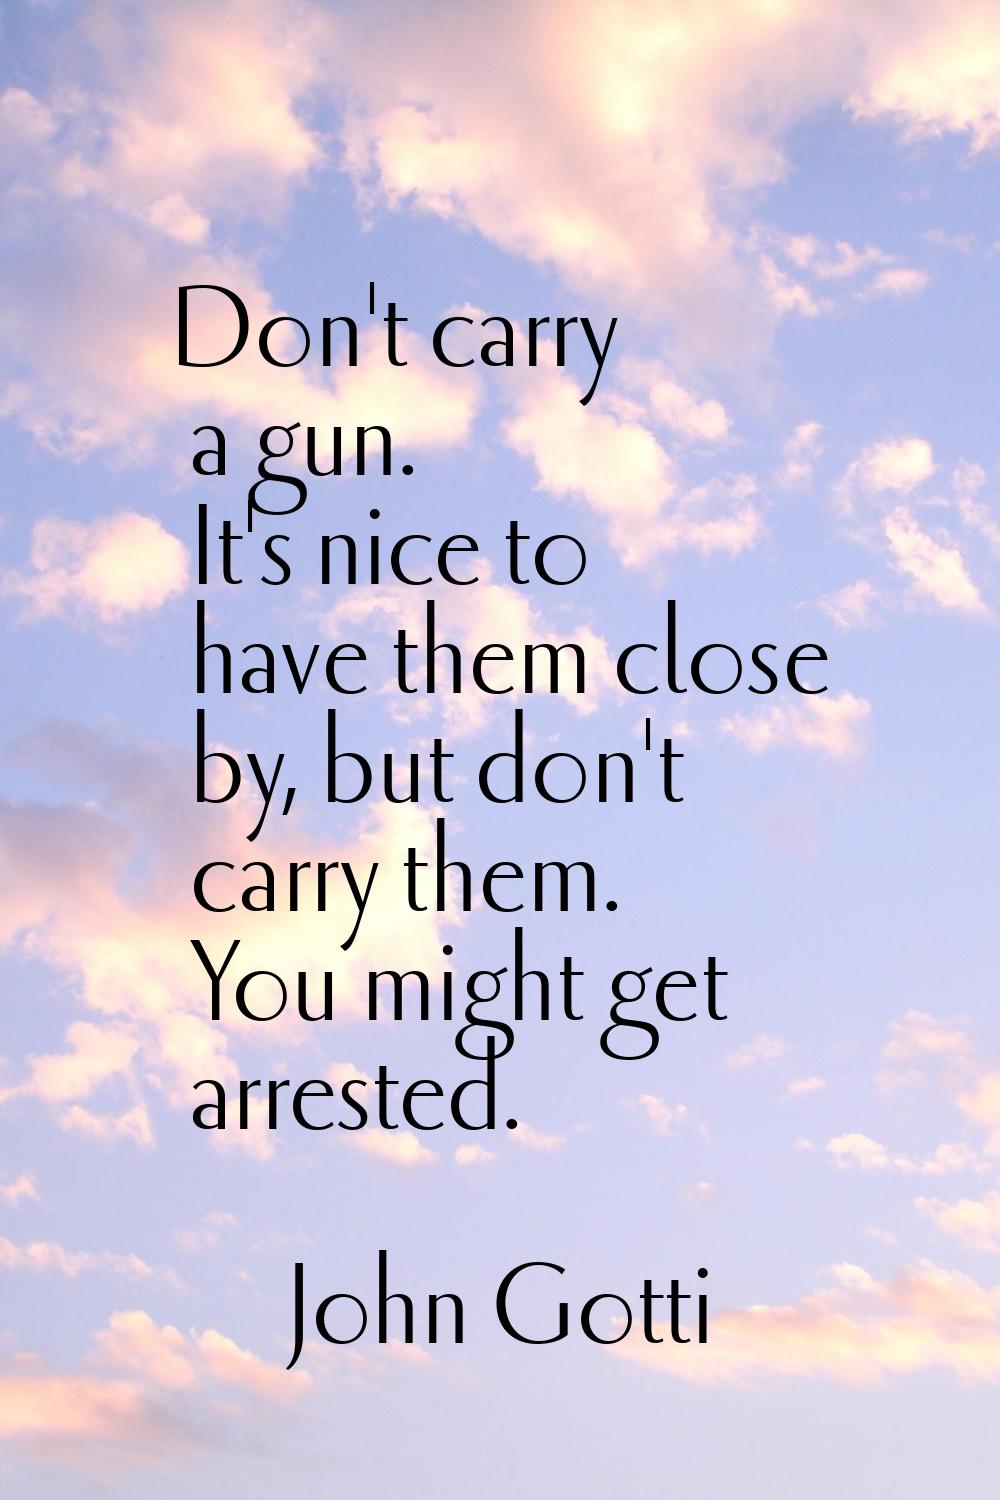 Don't carry a gun. It's nice to have them close by, but don't carry them. You might get arrested.